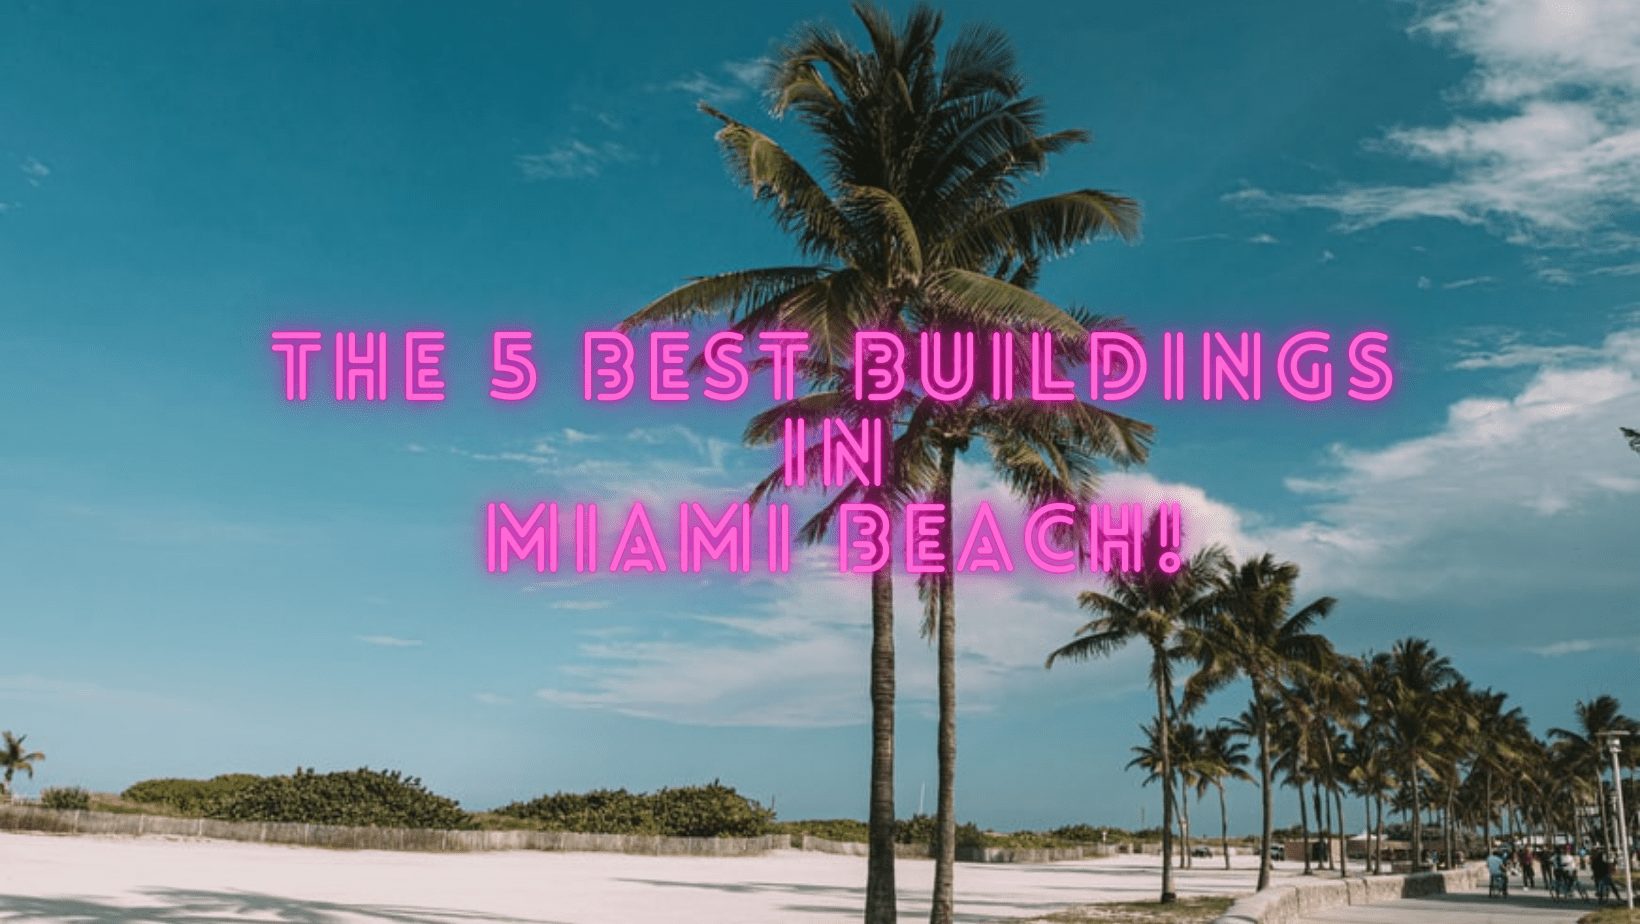 the 5 best buildings in miami beach